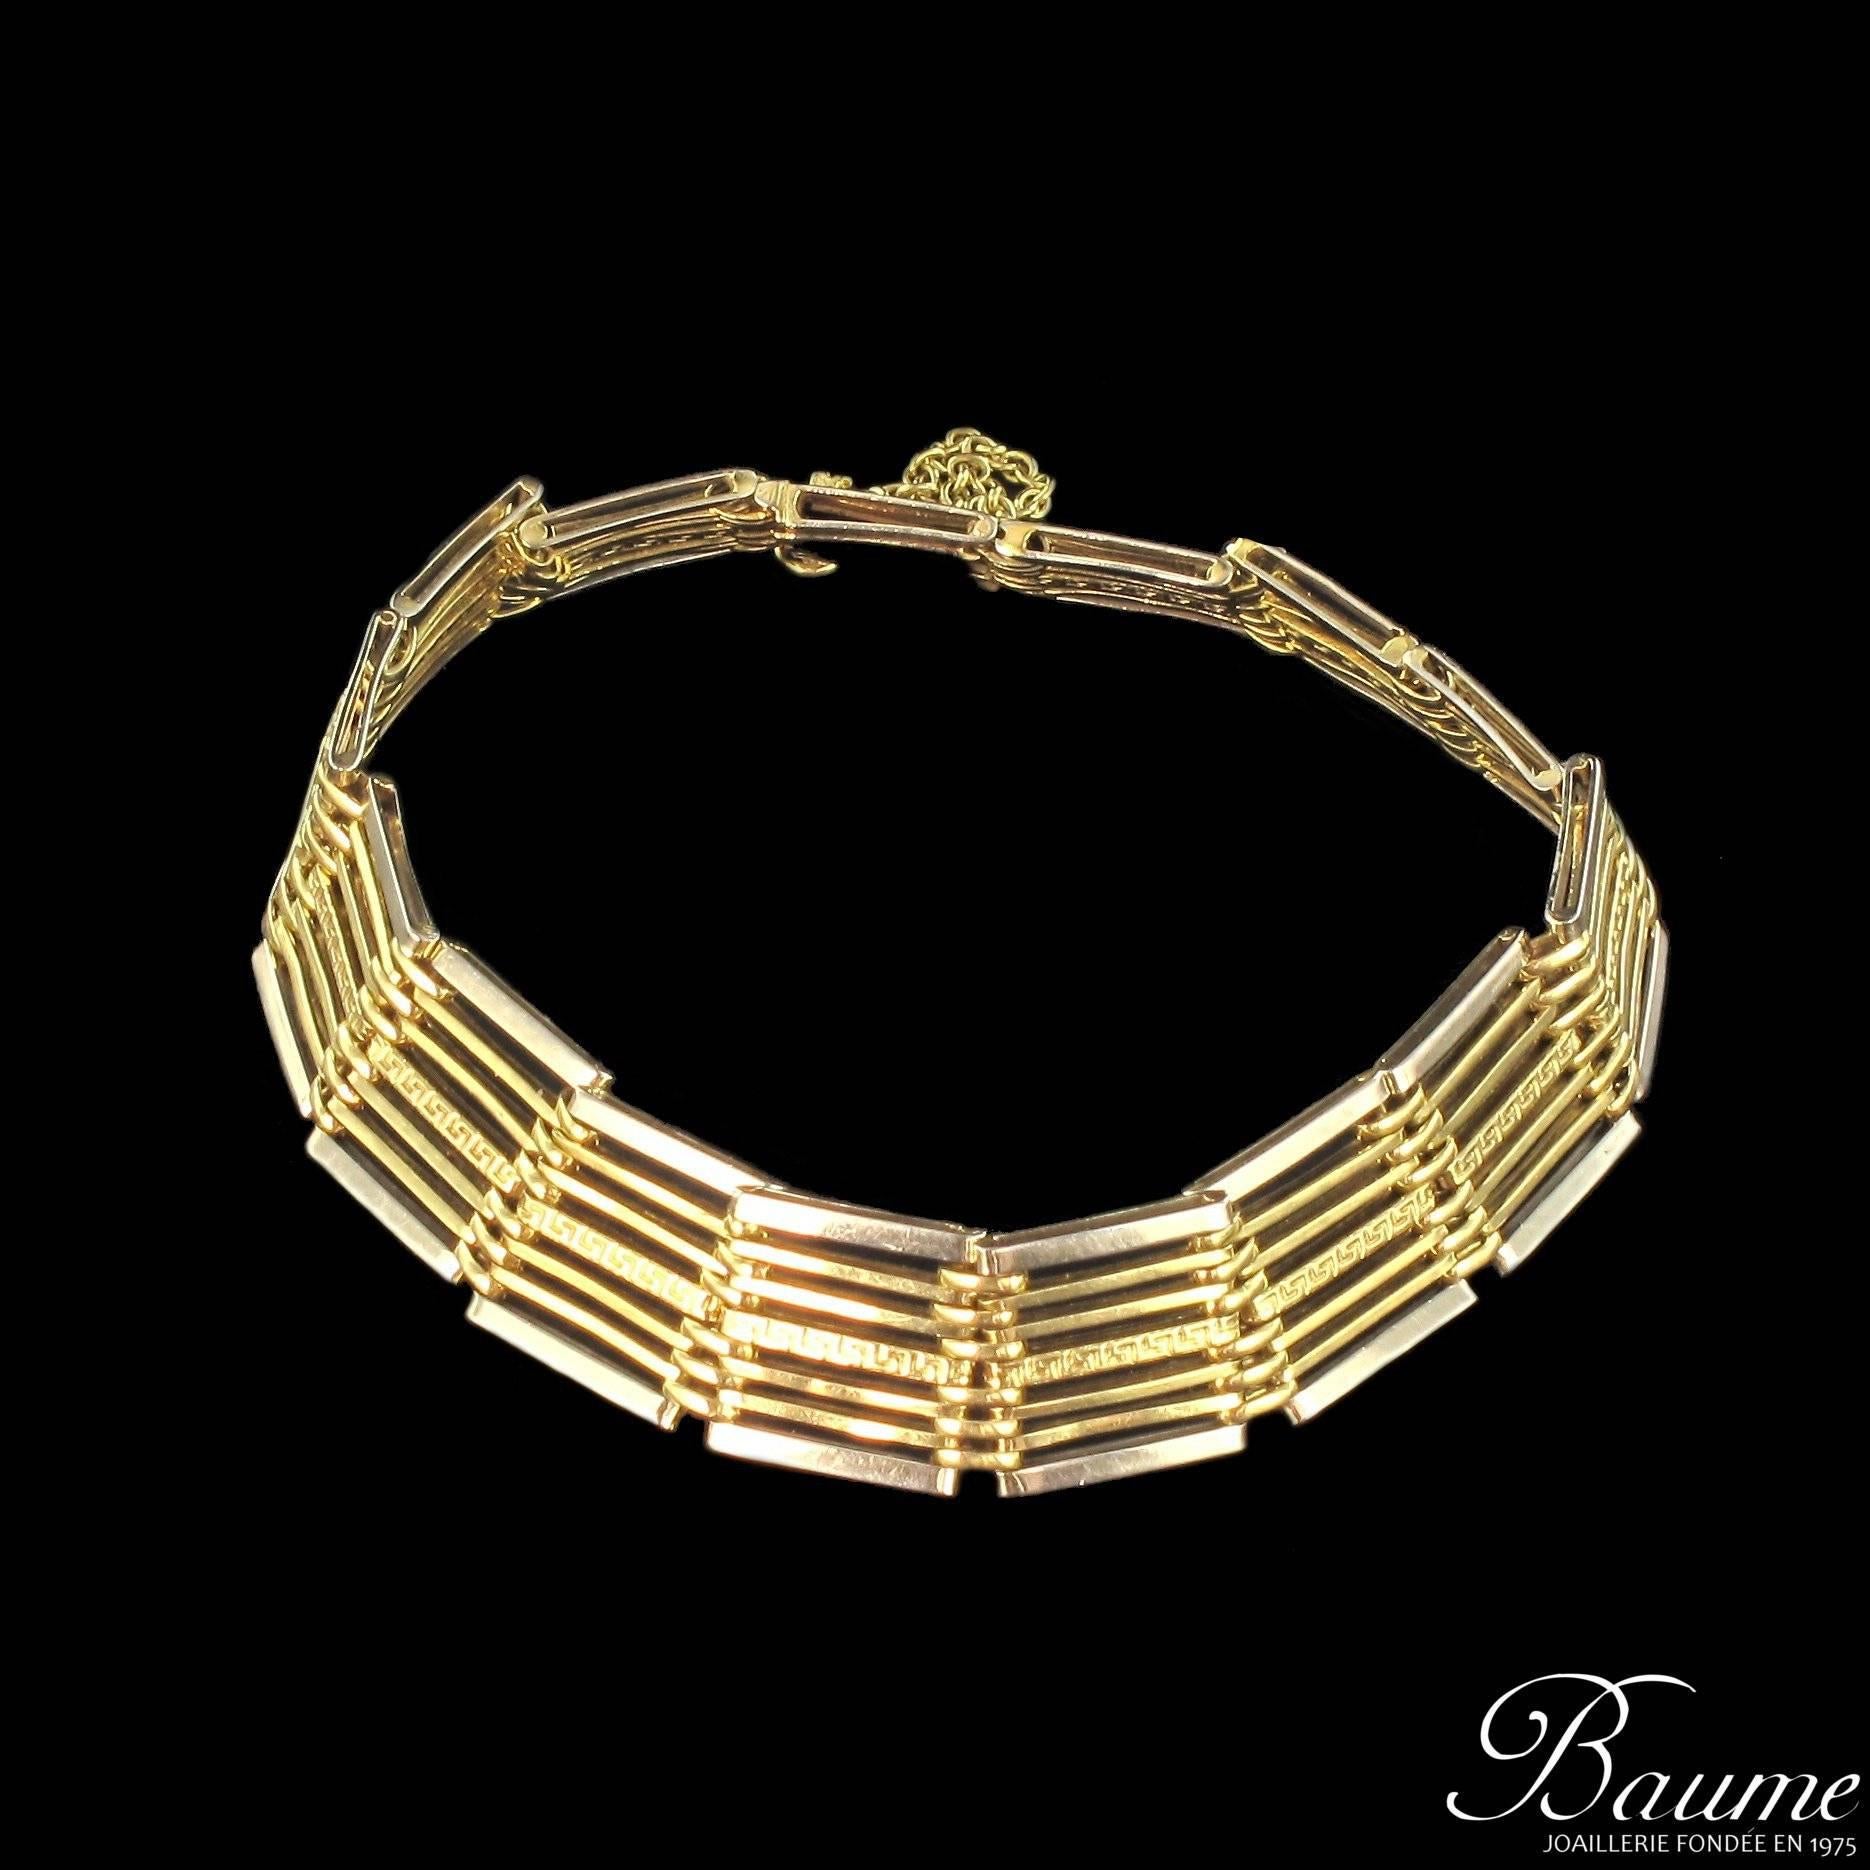 Bracelet in 18 carat white and yellow gold, eagle head and rhinos hallmark. 

This Art Deco bracelet is composed of 15 square shaped openwork links of flat double strands with the inner ones chiselled and the outer ones of white gold. These links